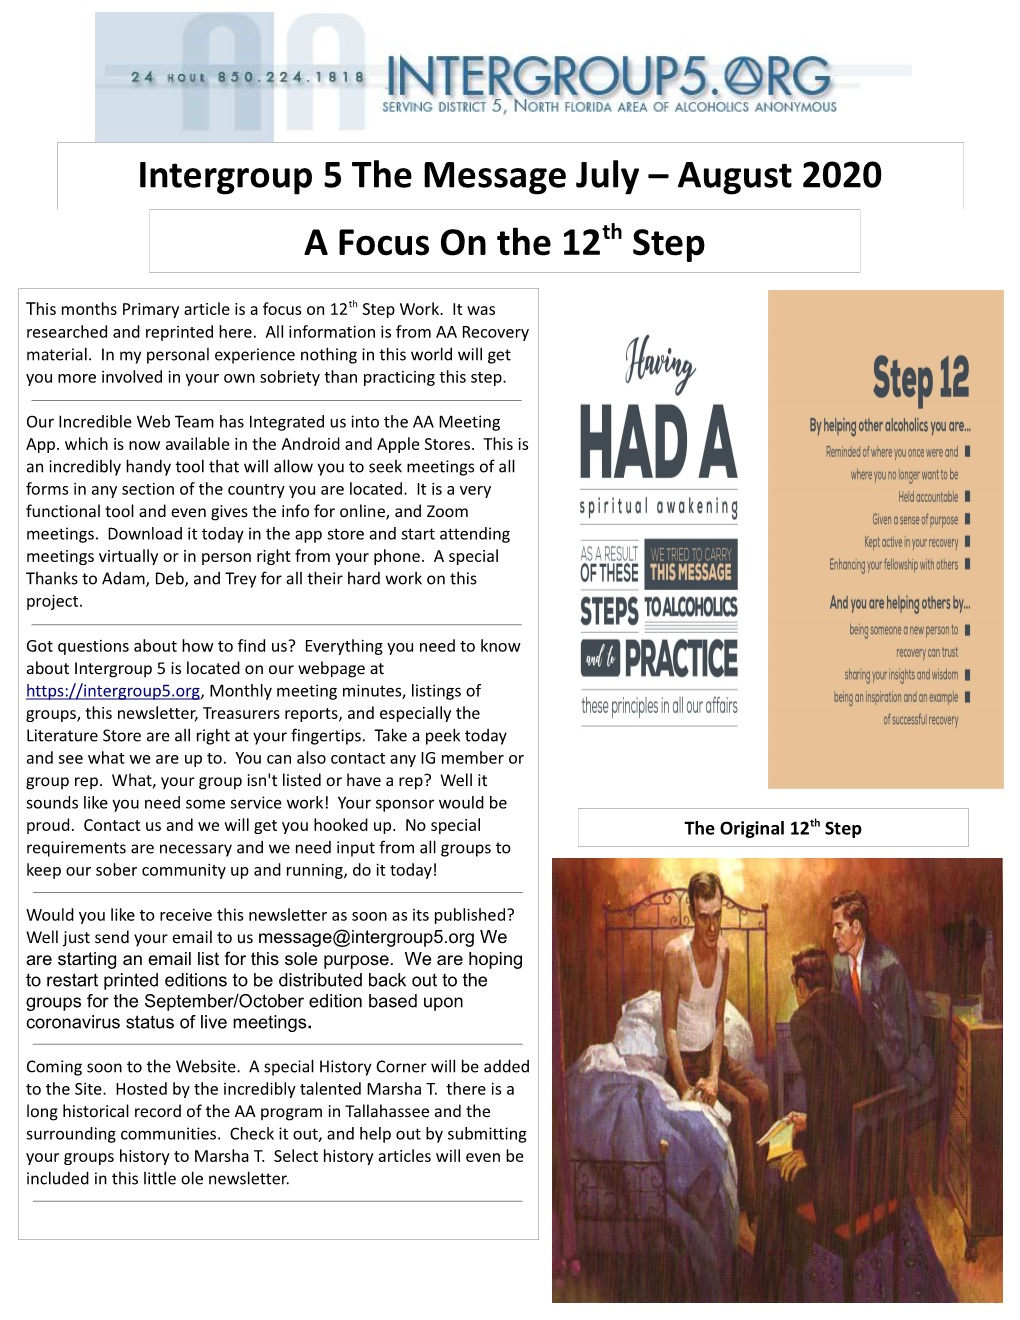 July – August 2020 a Focus on the 12Th Step